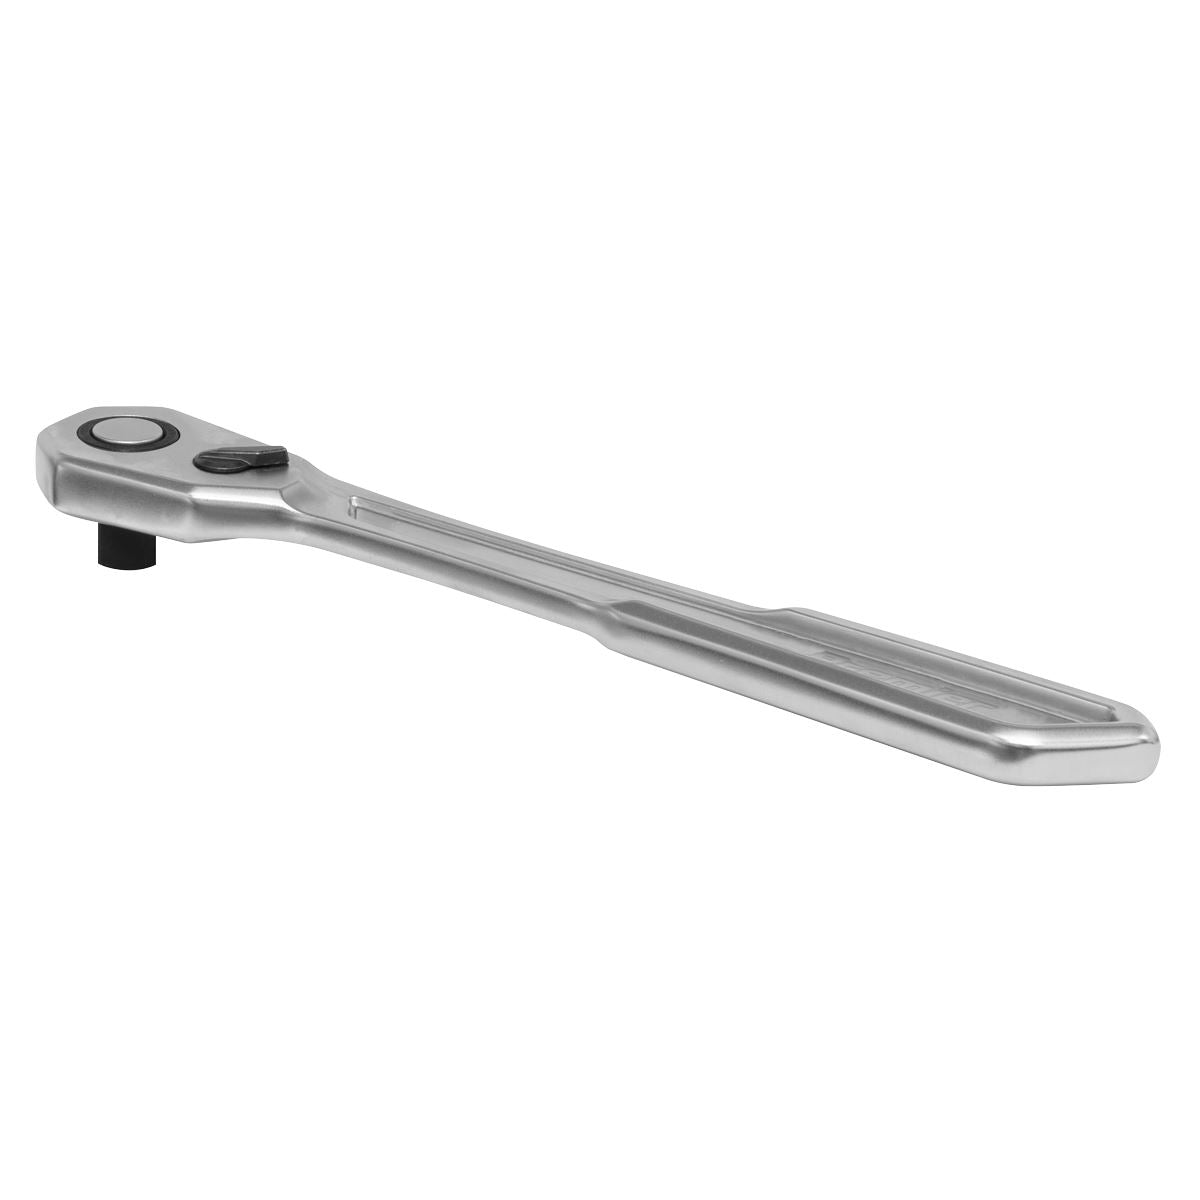 Sealey Premier Ratchet Wrench Low Profile 1/4" Drive Flip Reverse 90 Tooth